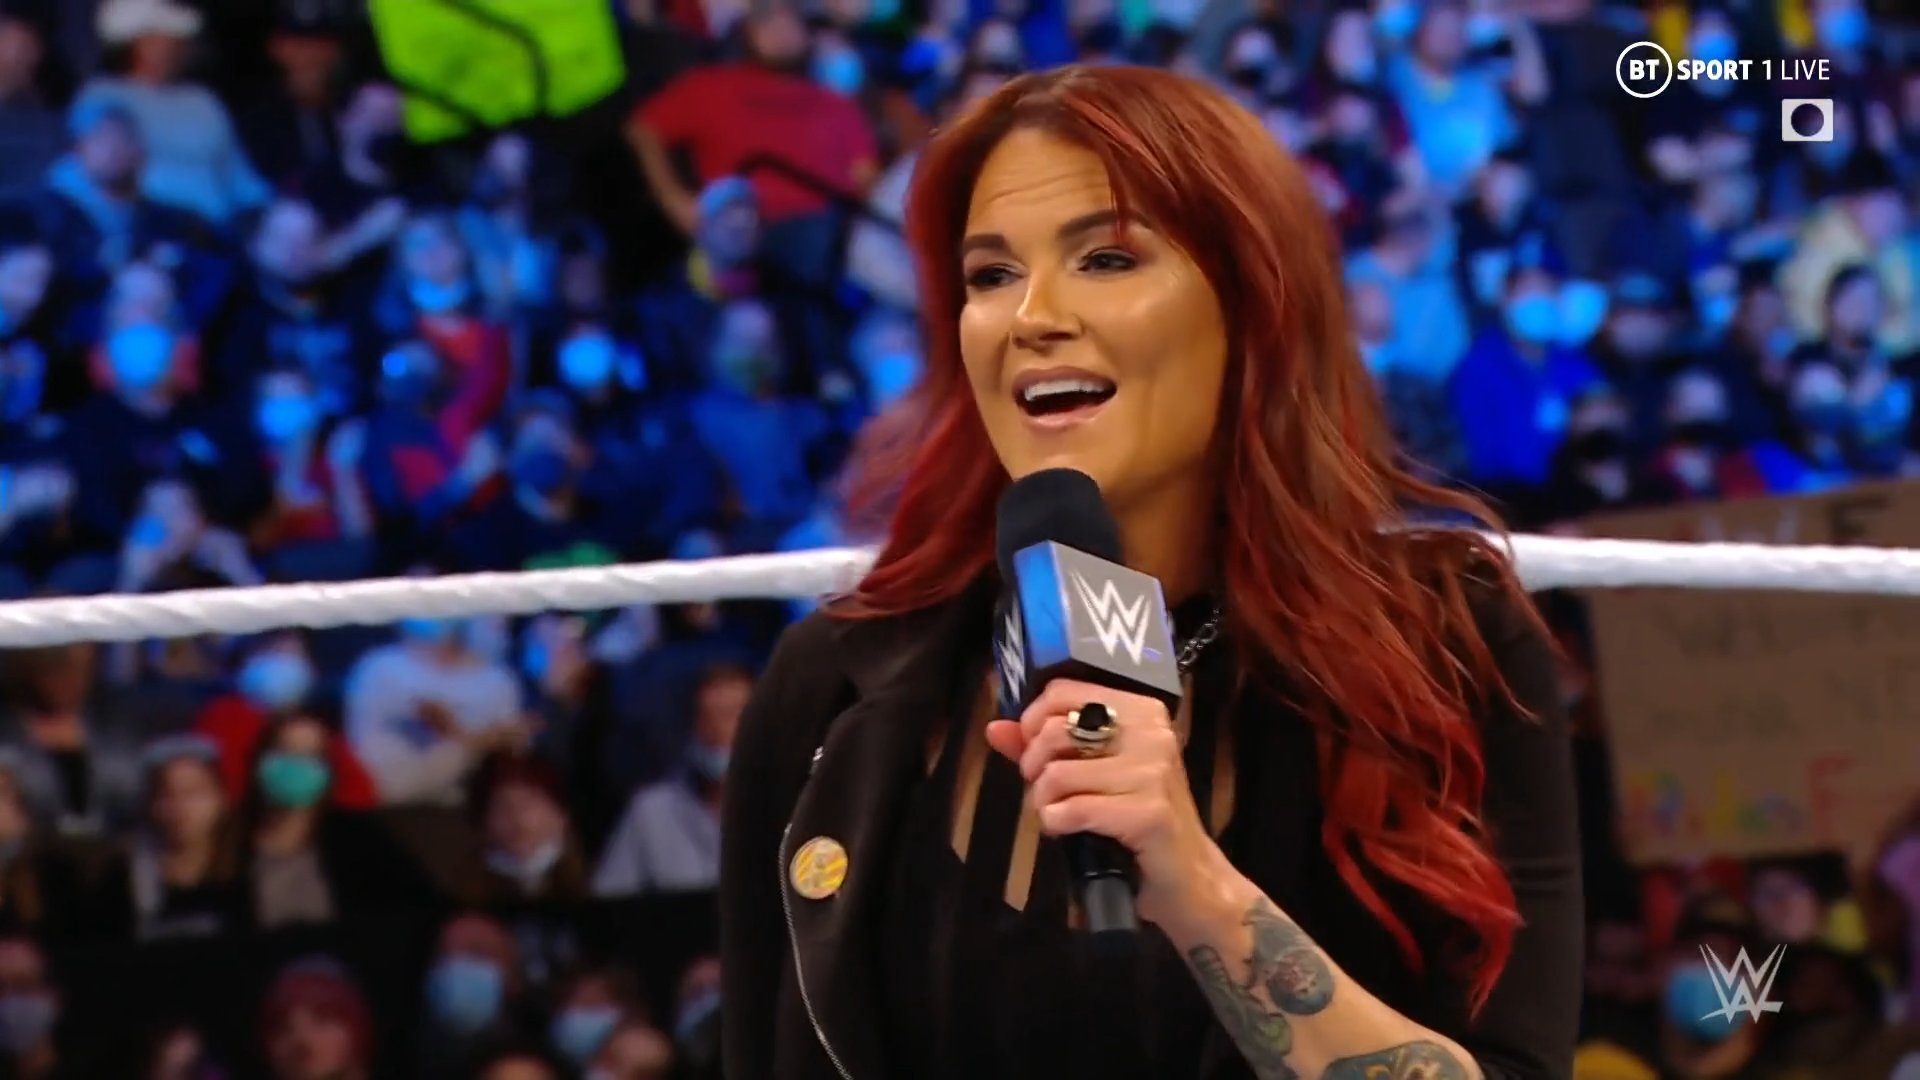 WWE Hall of Famer Lita is set to appear on Raw this week.